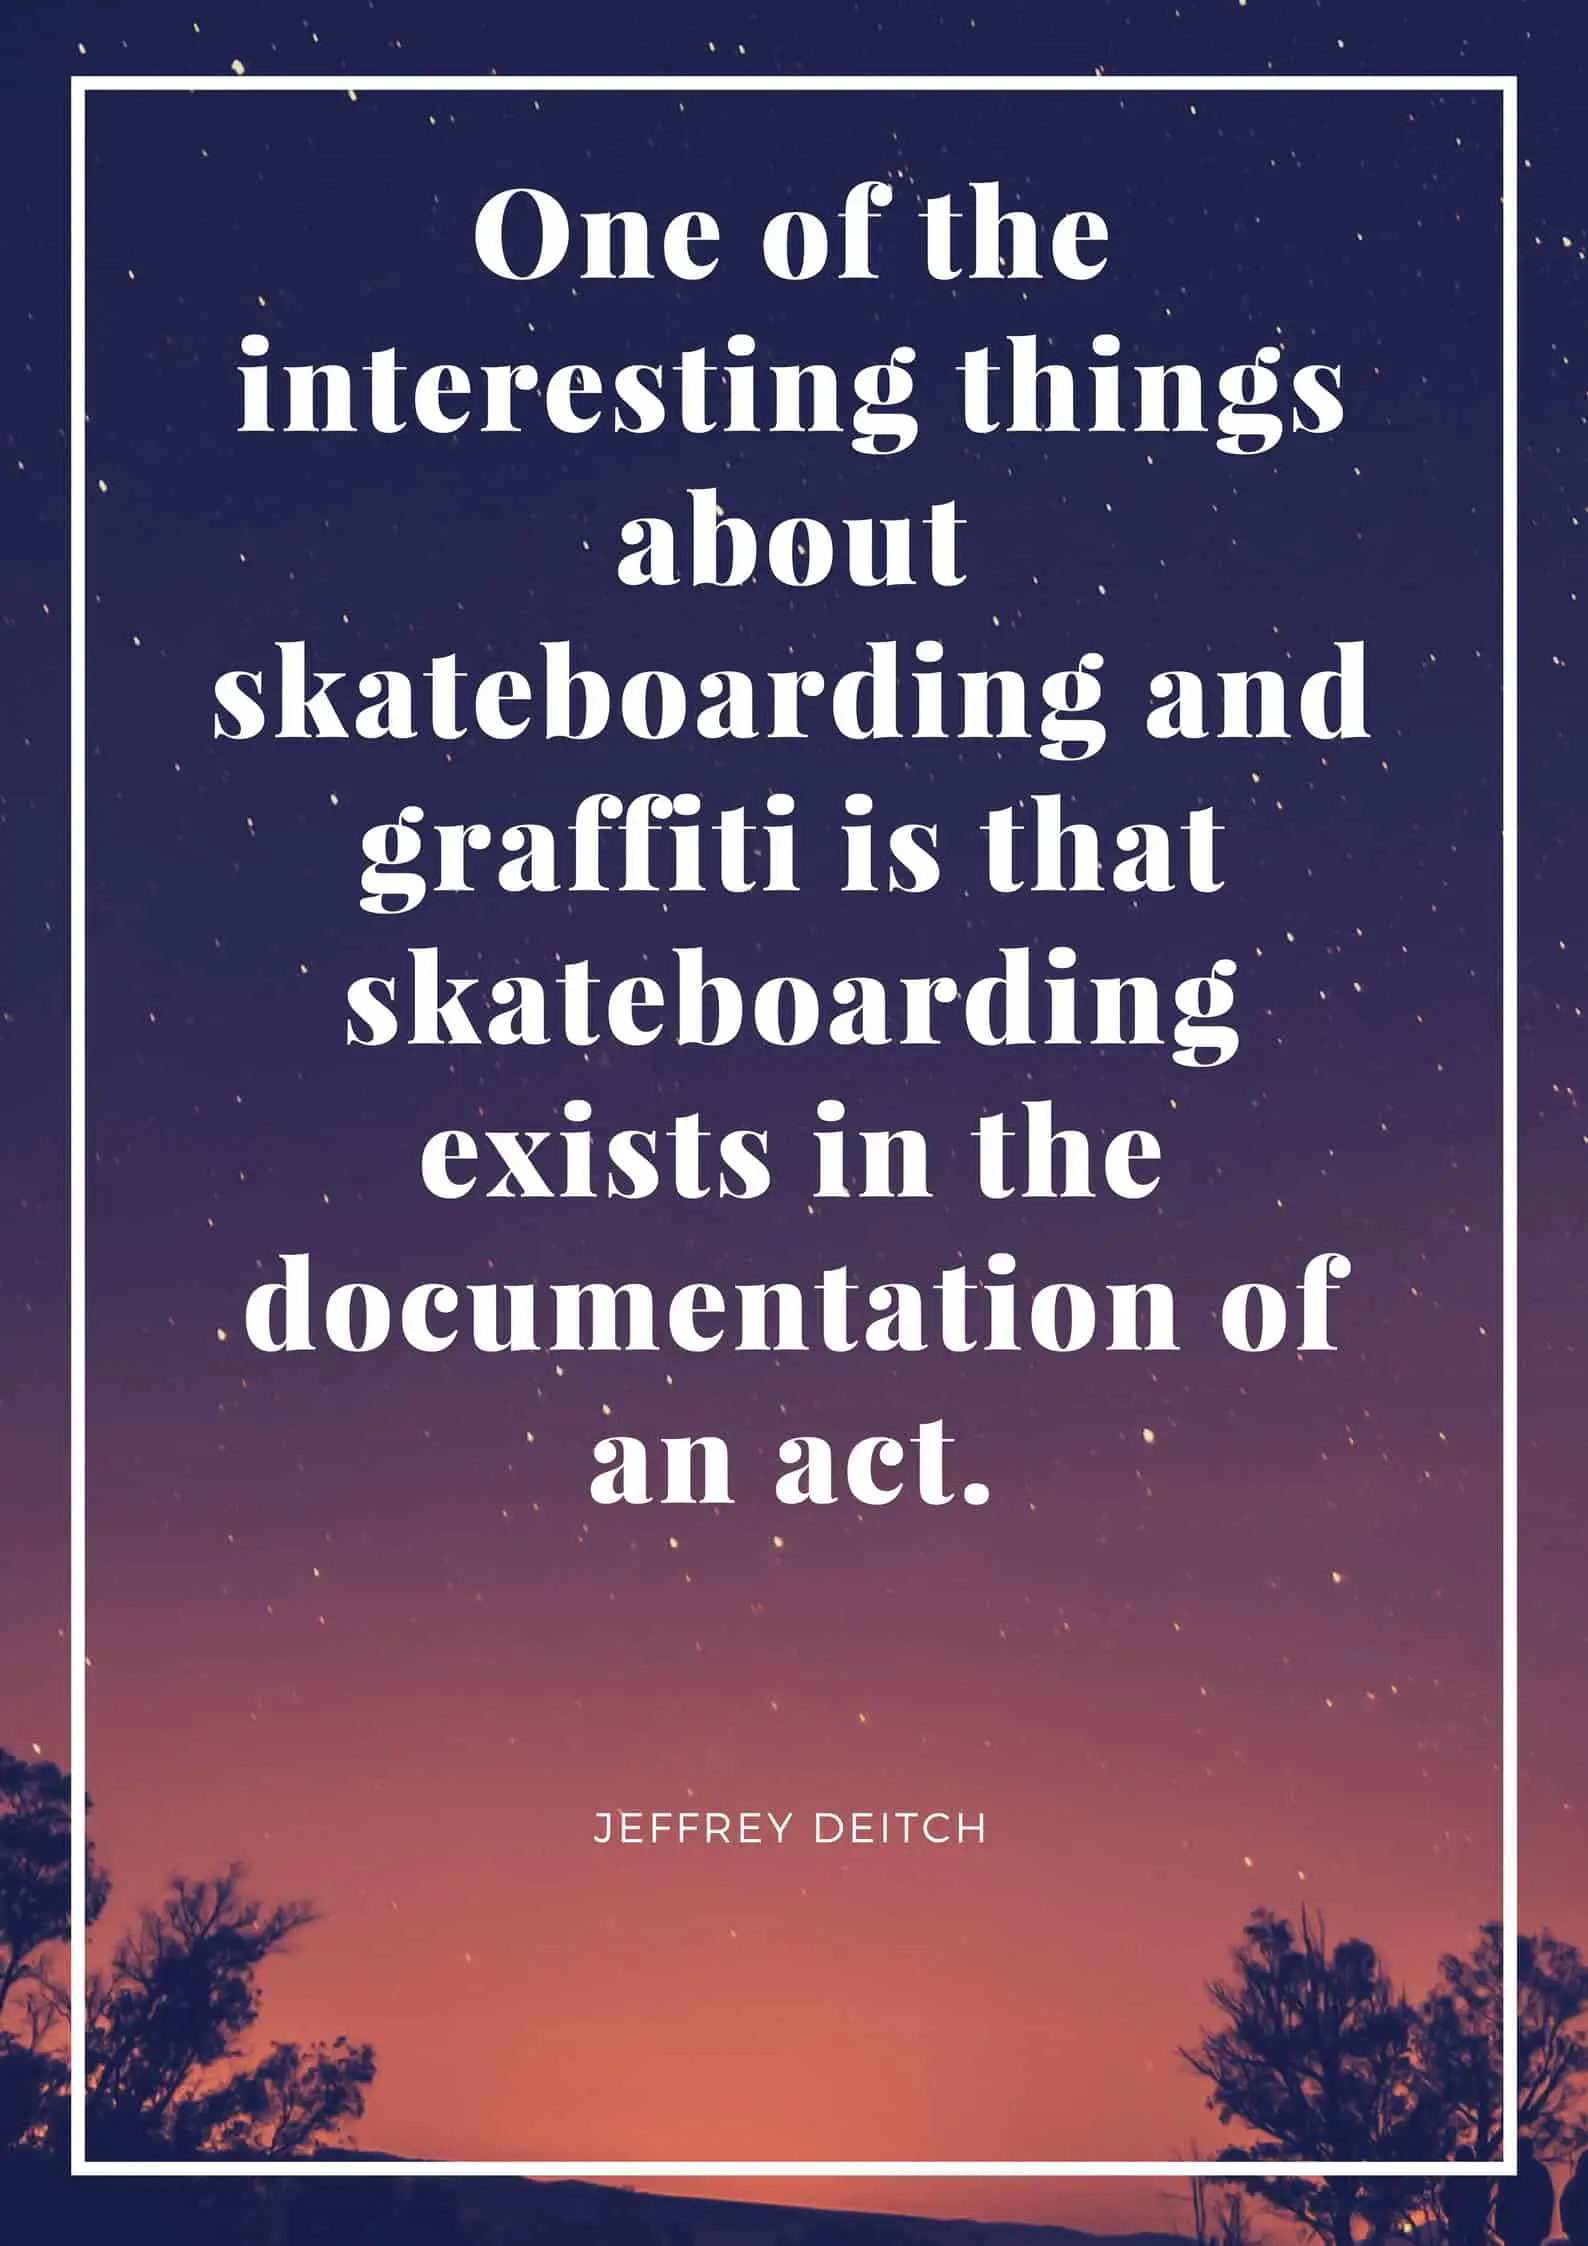 One of the interesting things about skateboarding and graffiti is that skateboarding exists in the documentation of an act.